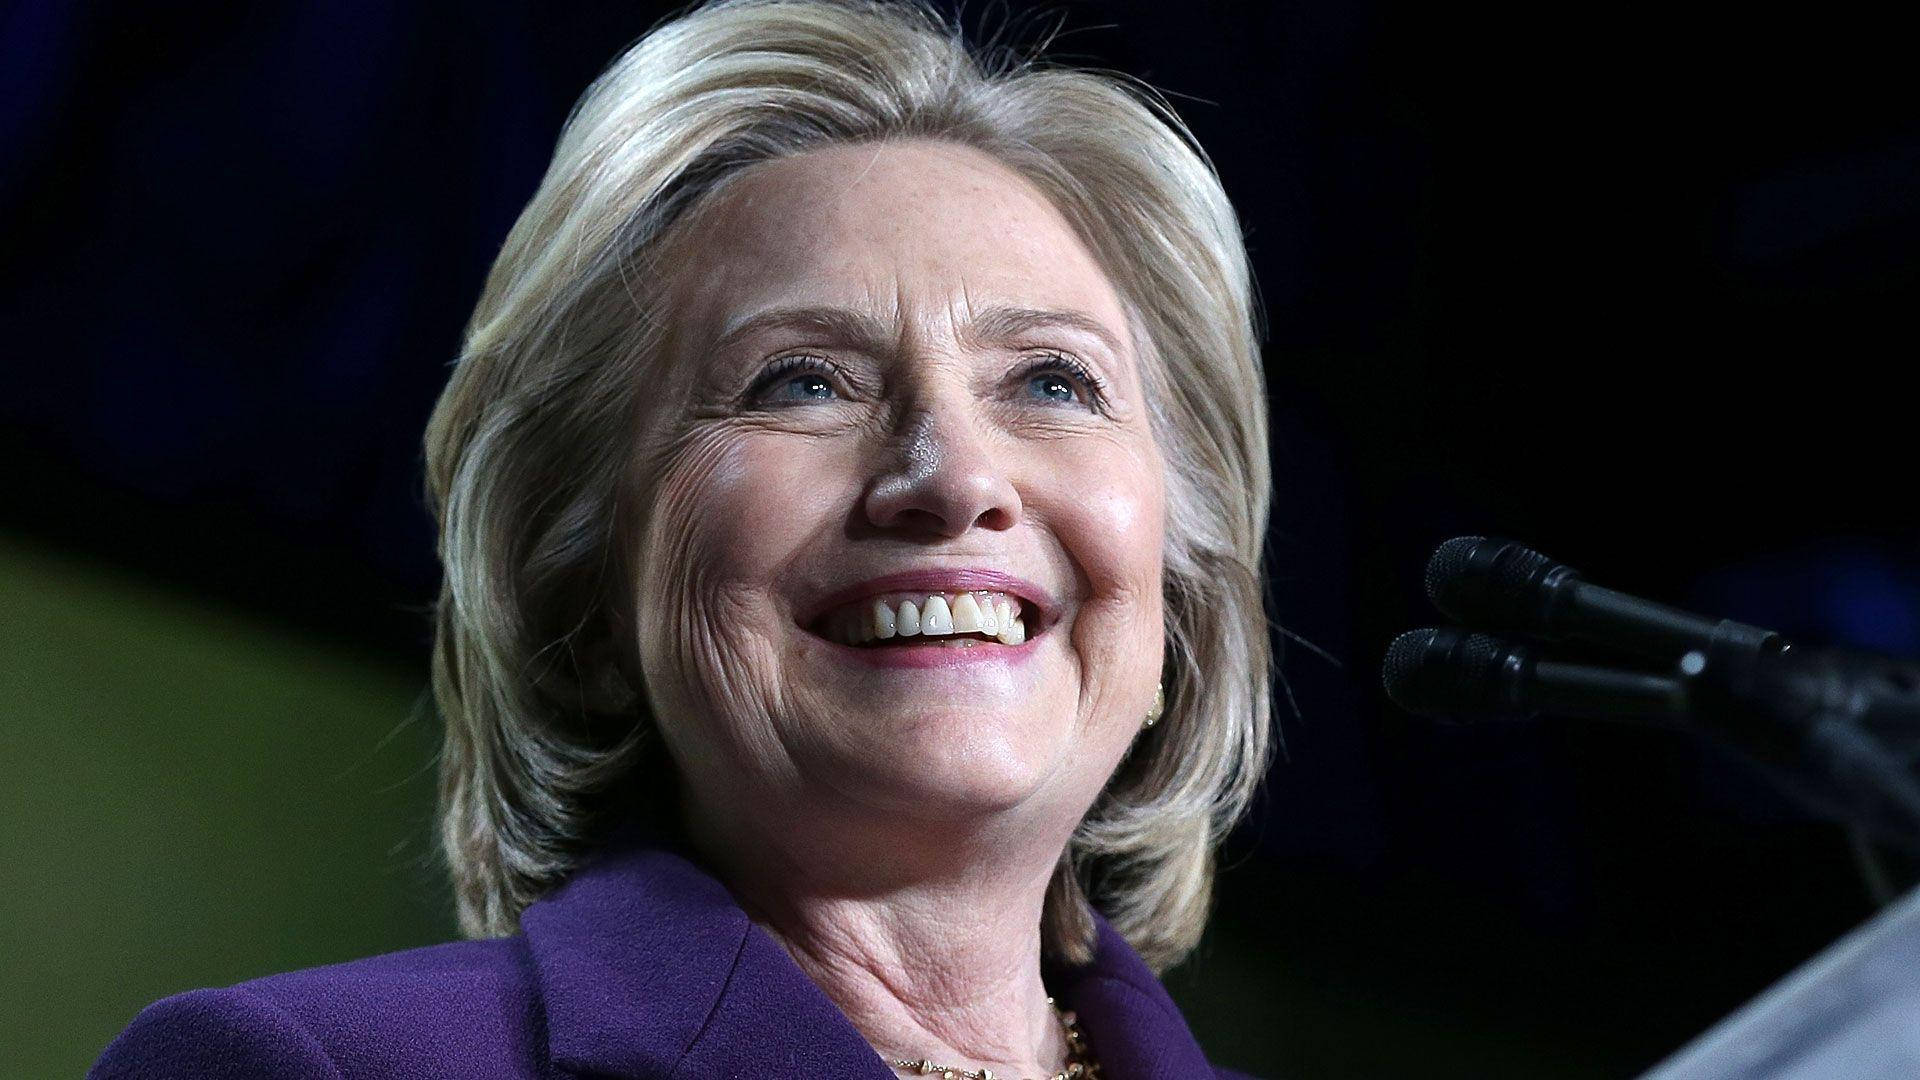 Hillary Clinton In A Cheerful Mood Background